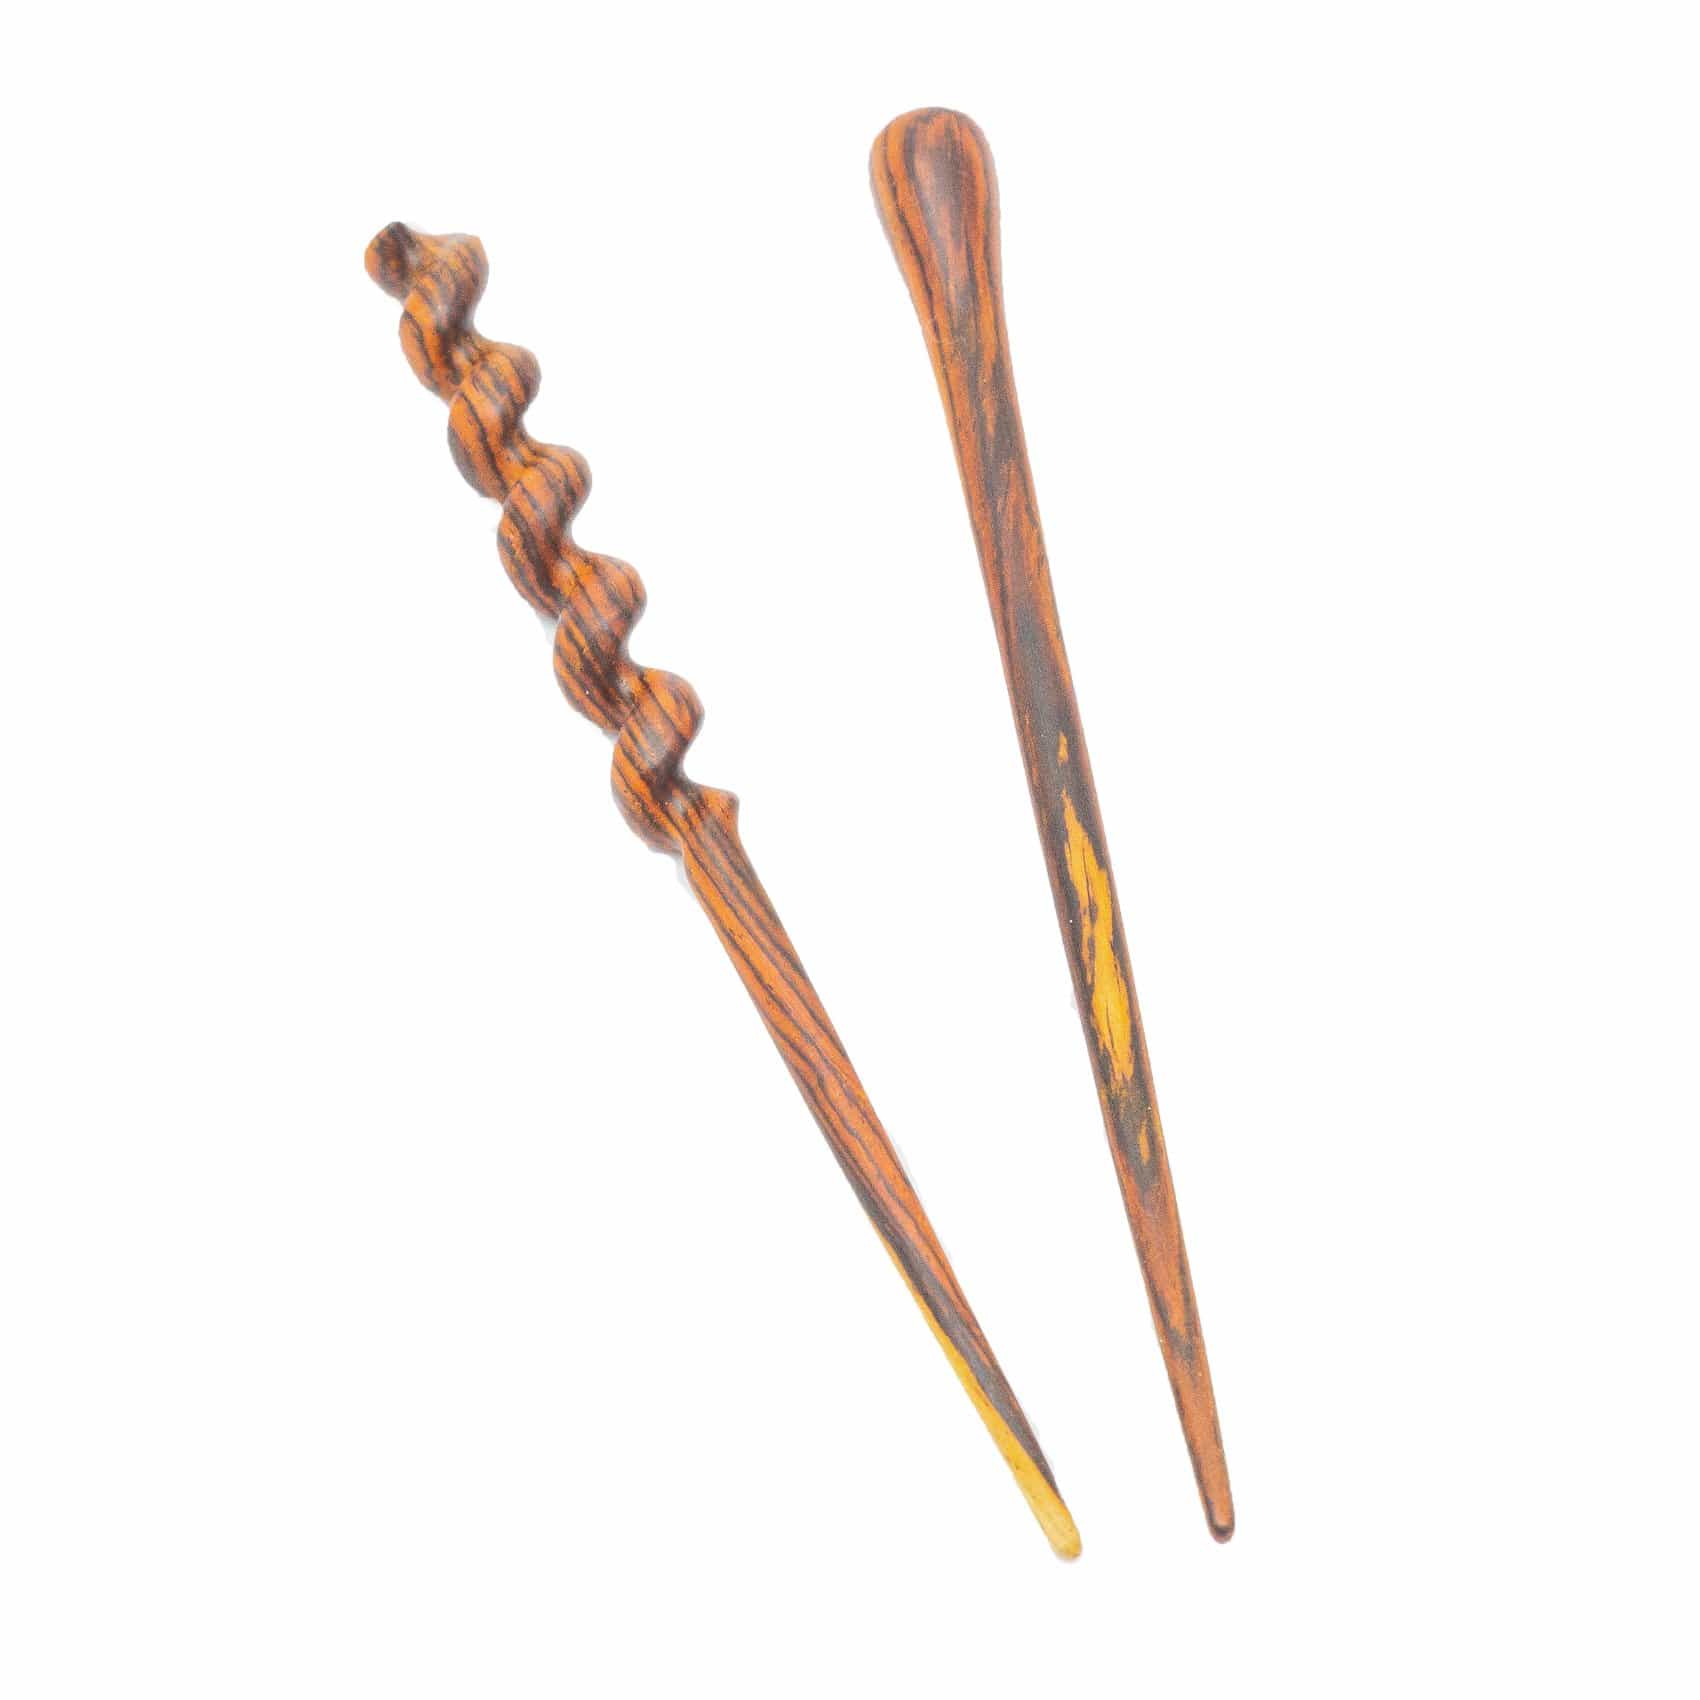 Twisted Wooden Hair Stick  Sevs Wood Crafts